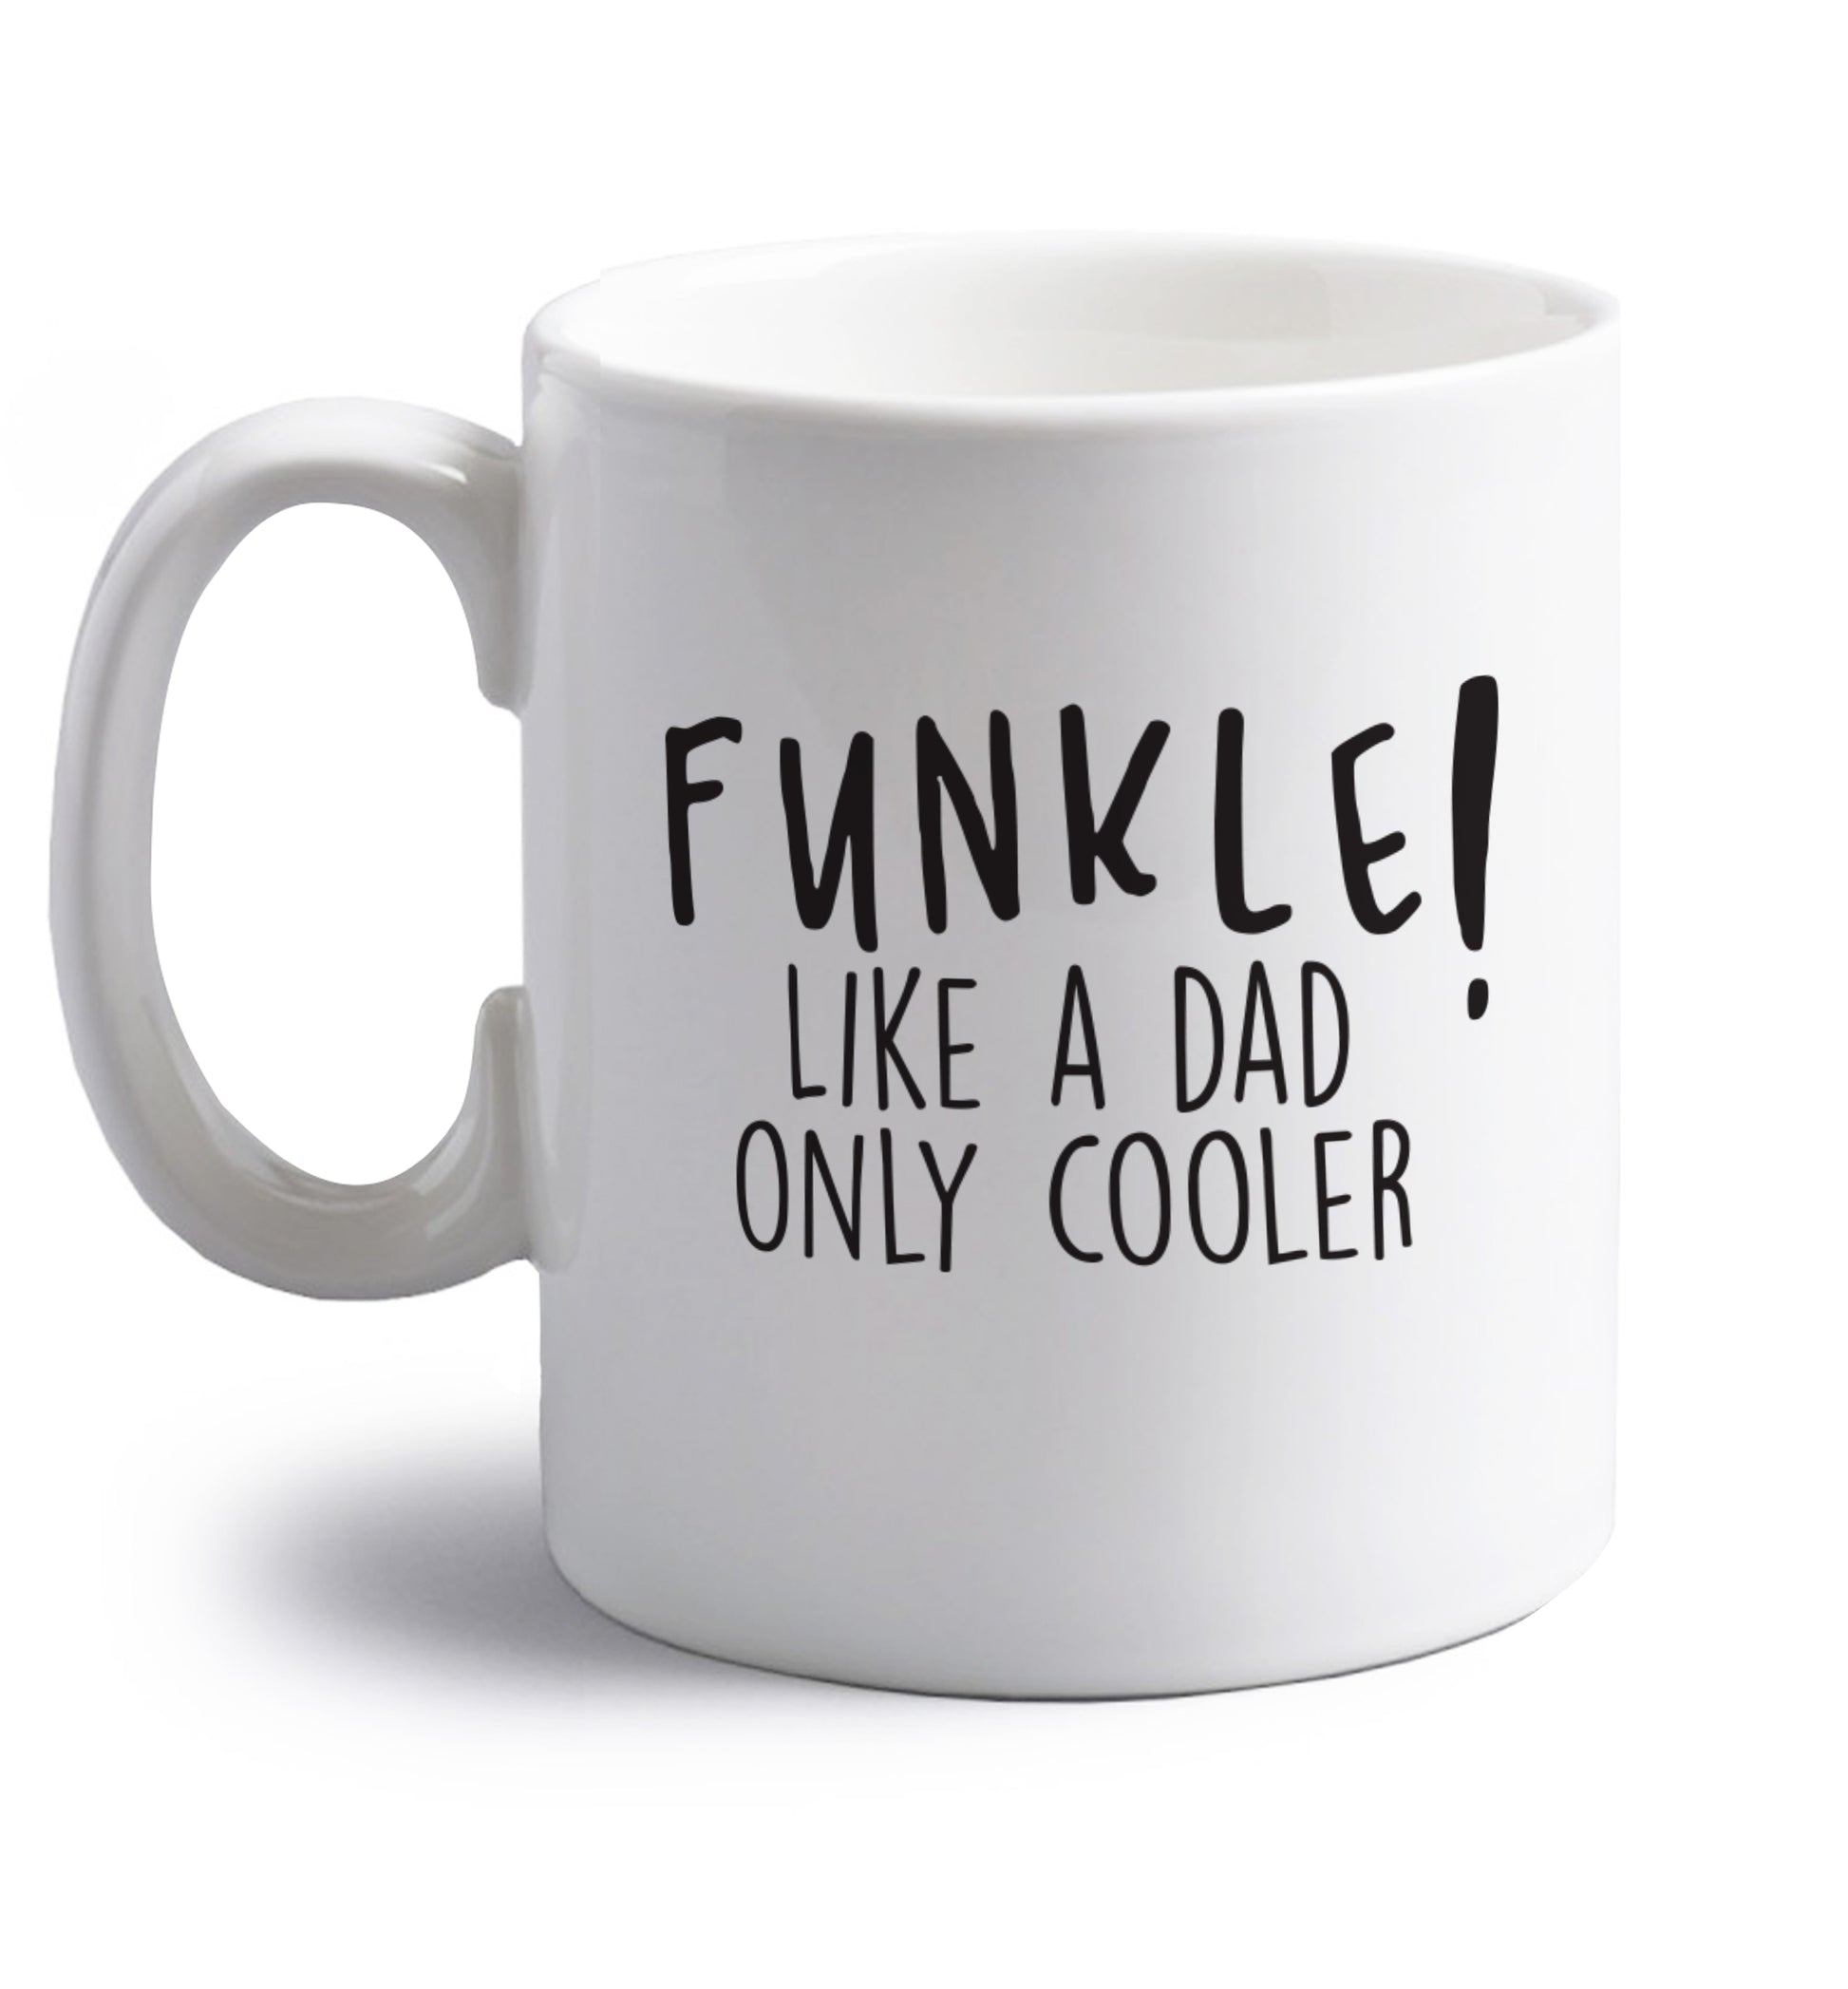 Funkle Like a Dad Only Cooler right handed white ceramic mug 